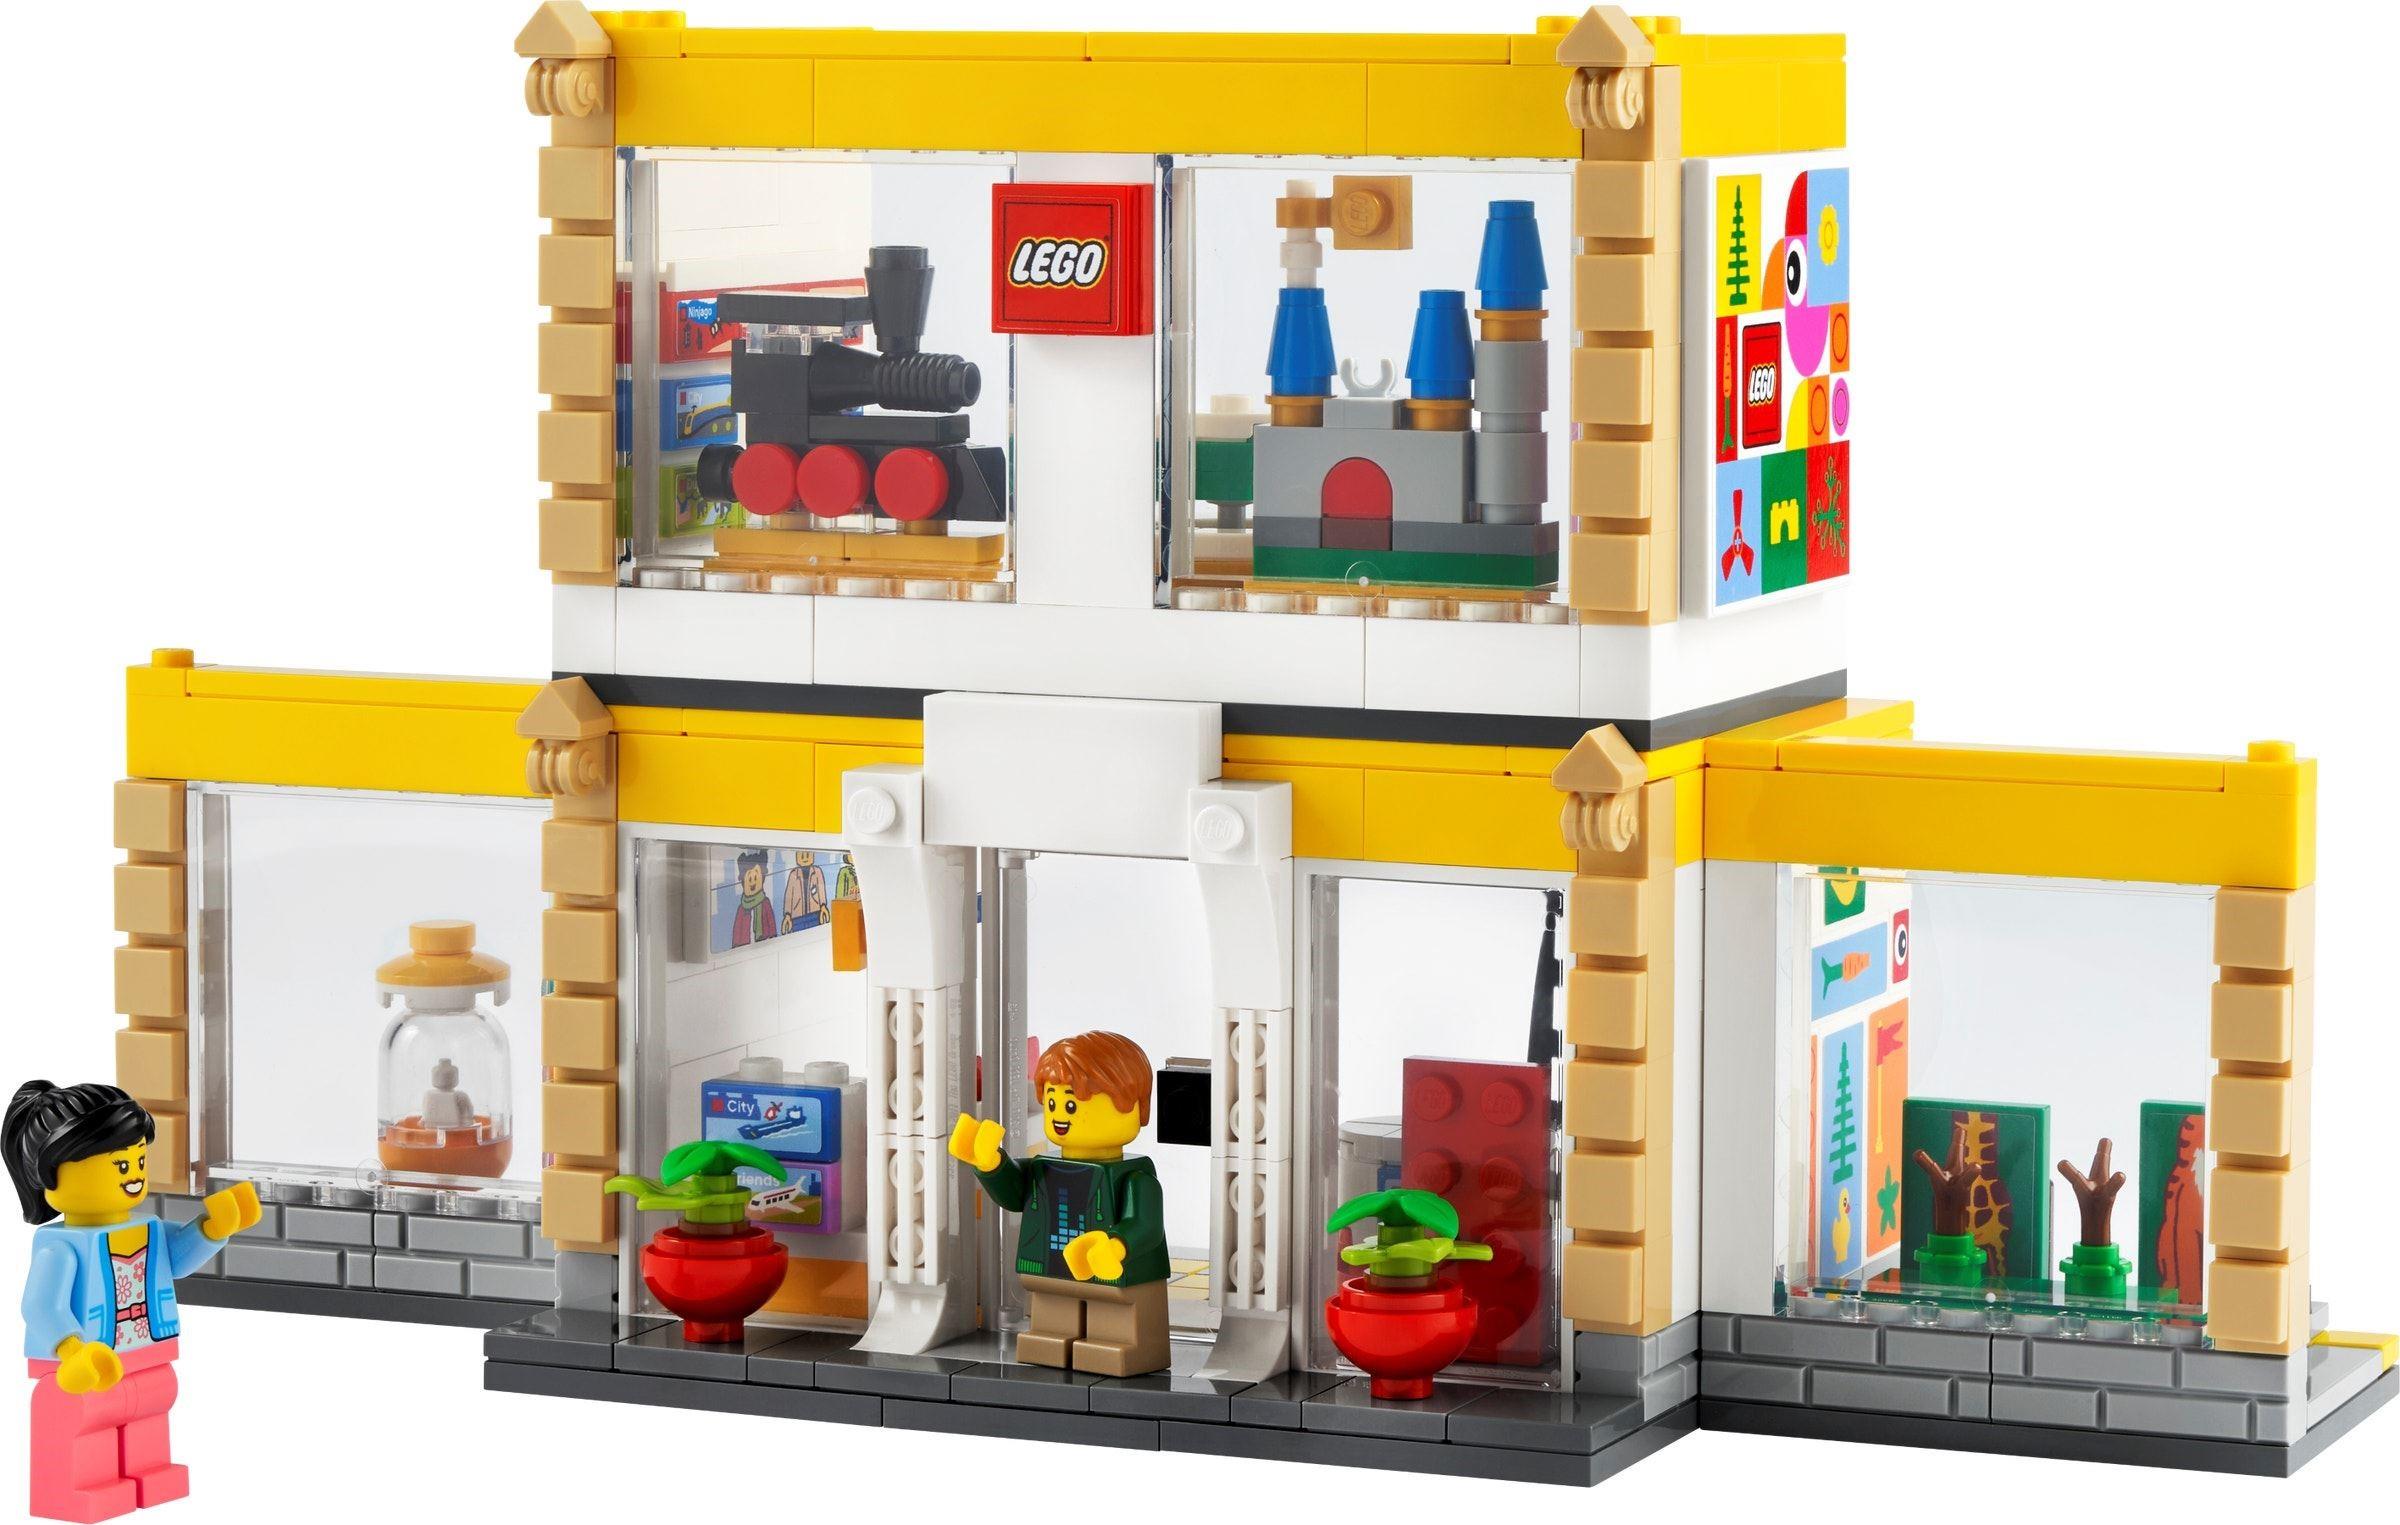 GWP: 40528 LEGO Retail Store [Hands On Review]